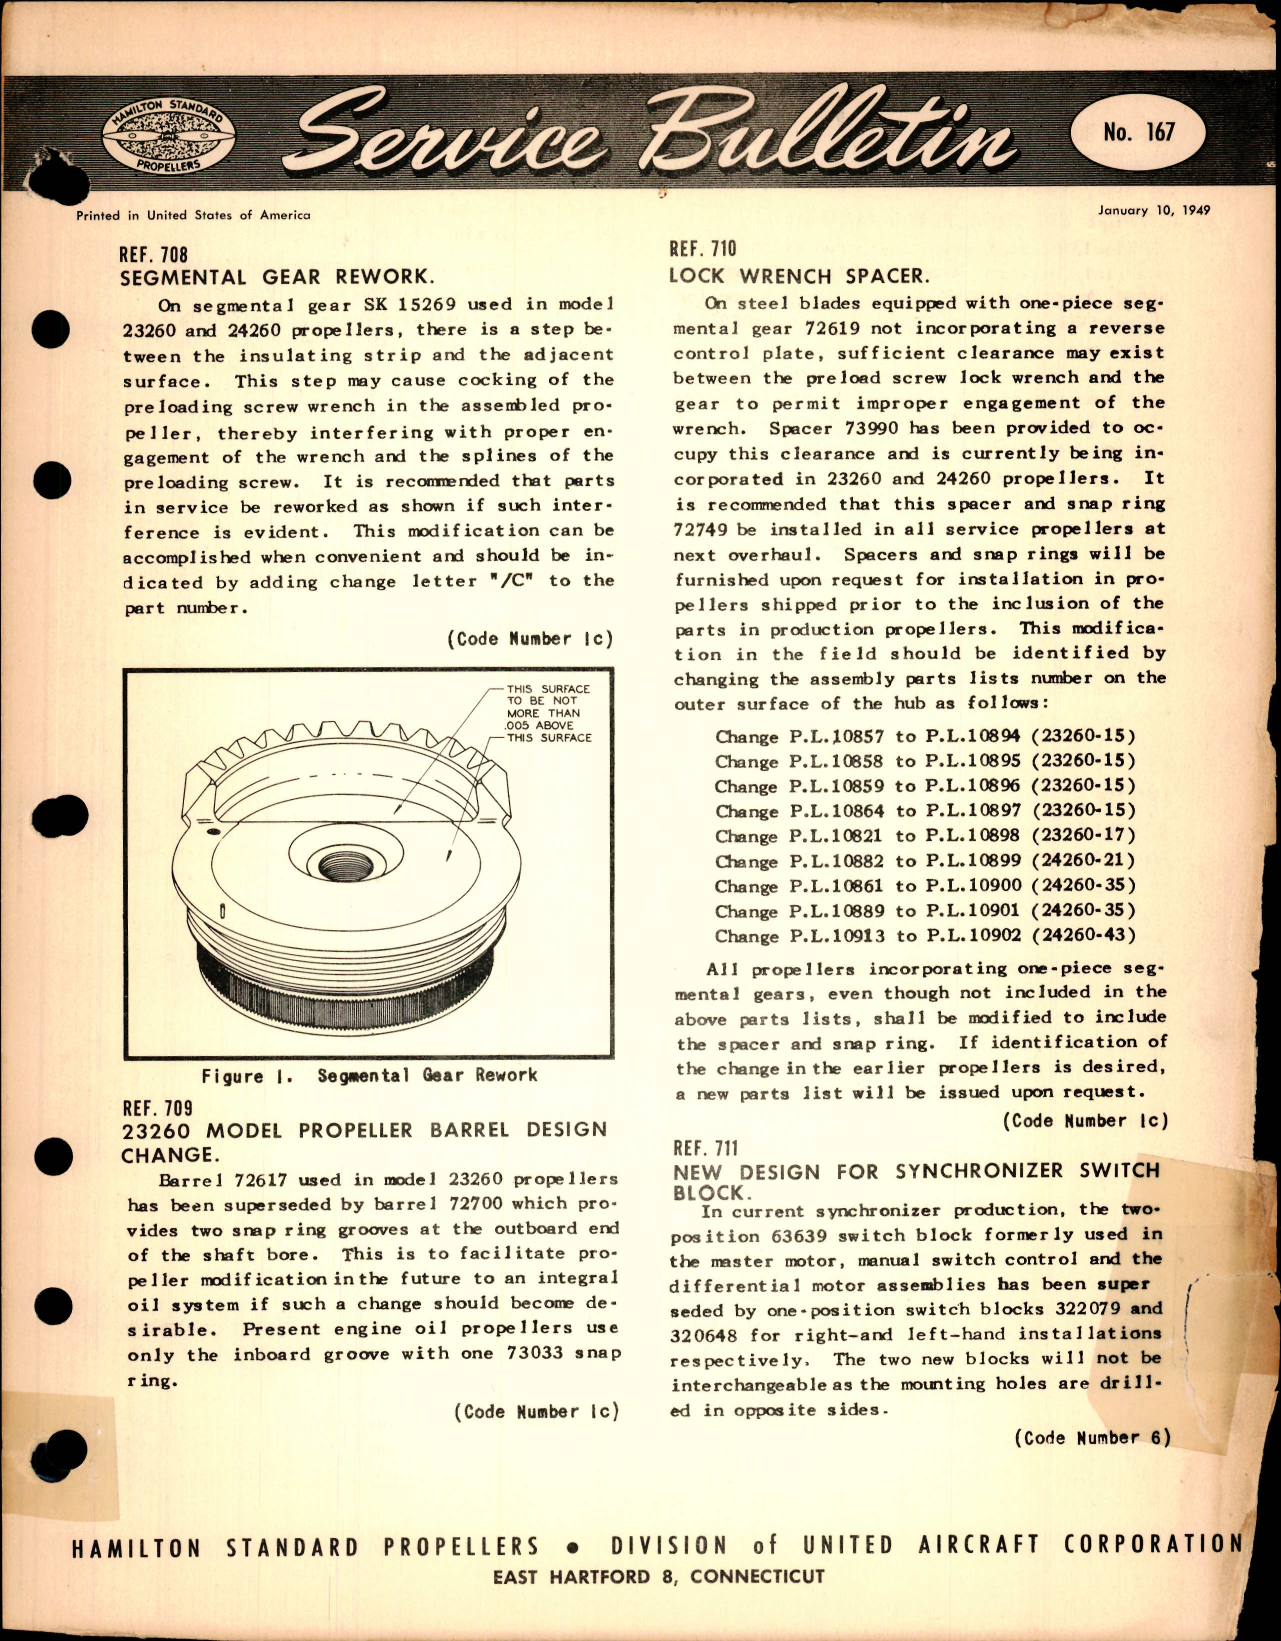 Sample page 1 from AirCorps Library document: Segmental Gear Rework, Ref 708